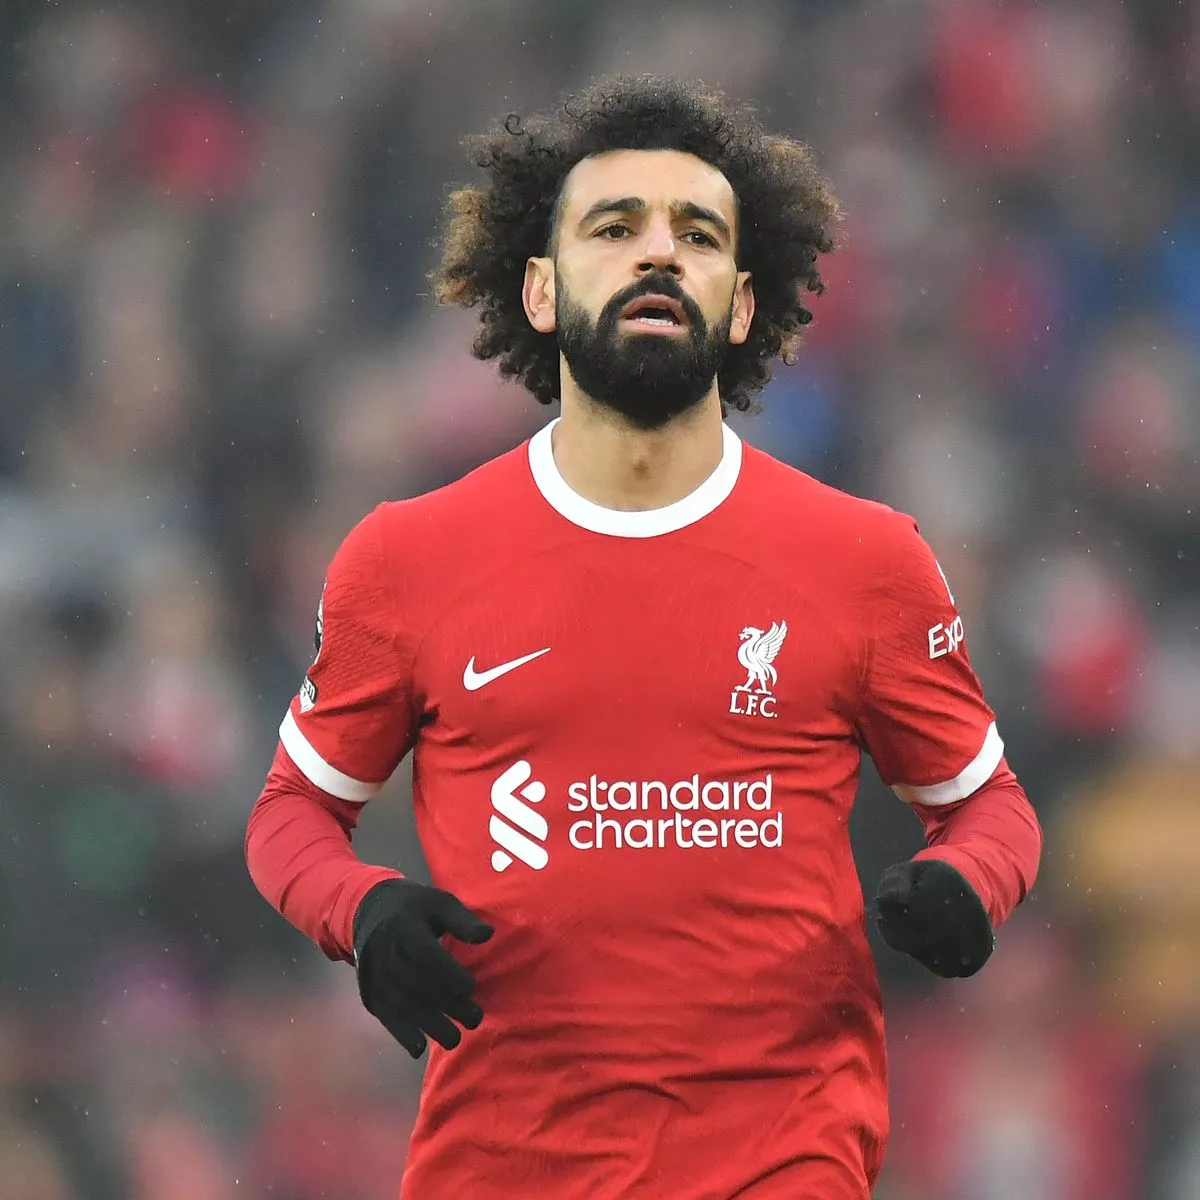 Liverpool legend names the one player whose departure would be a 'bigger blow' than Salah - Speculation surrounding the player in question